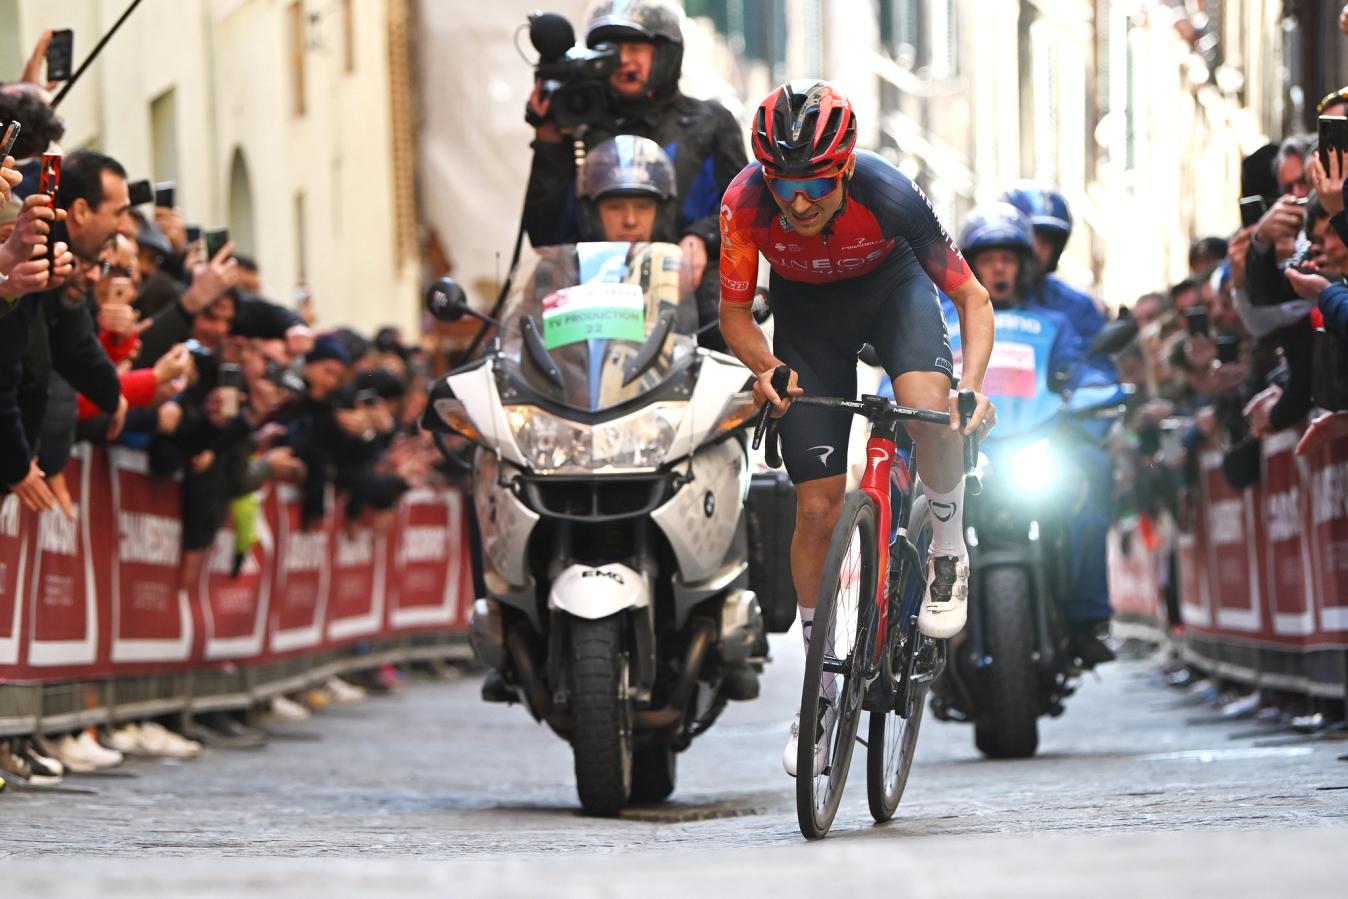 Tom Pidcock may have faltered at the Tour de France, but Strade Bianche added an esteemed race to his palmarès